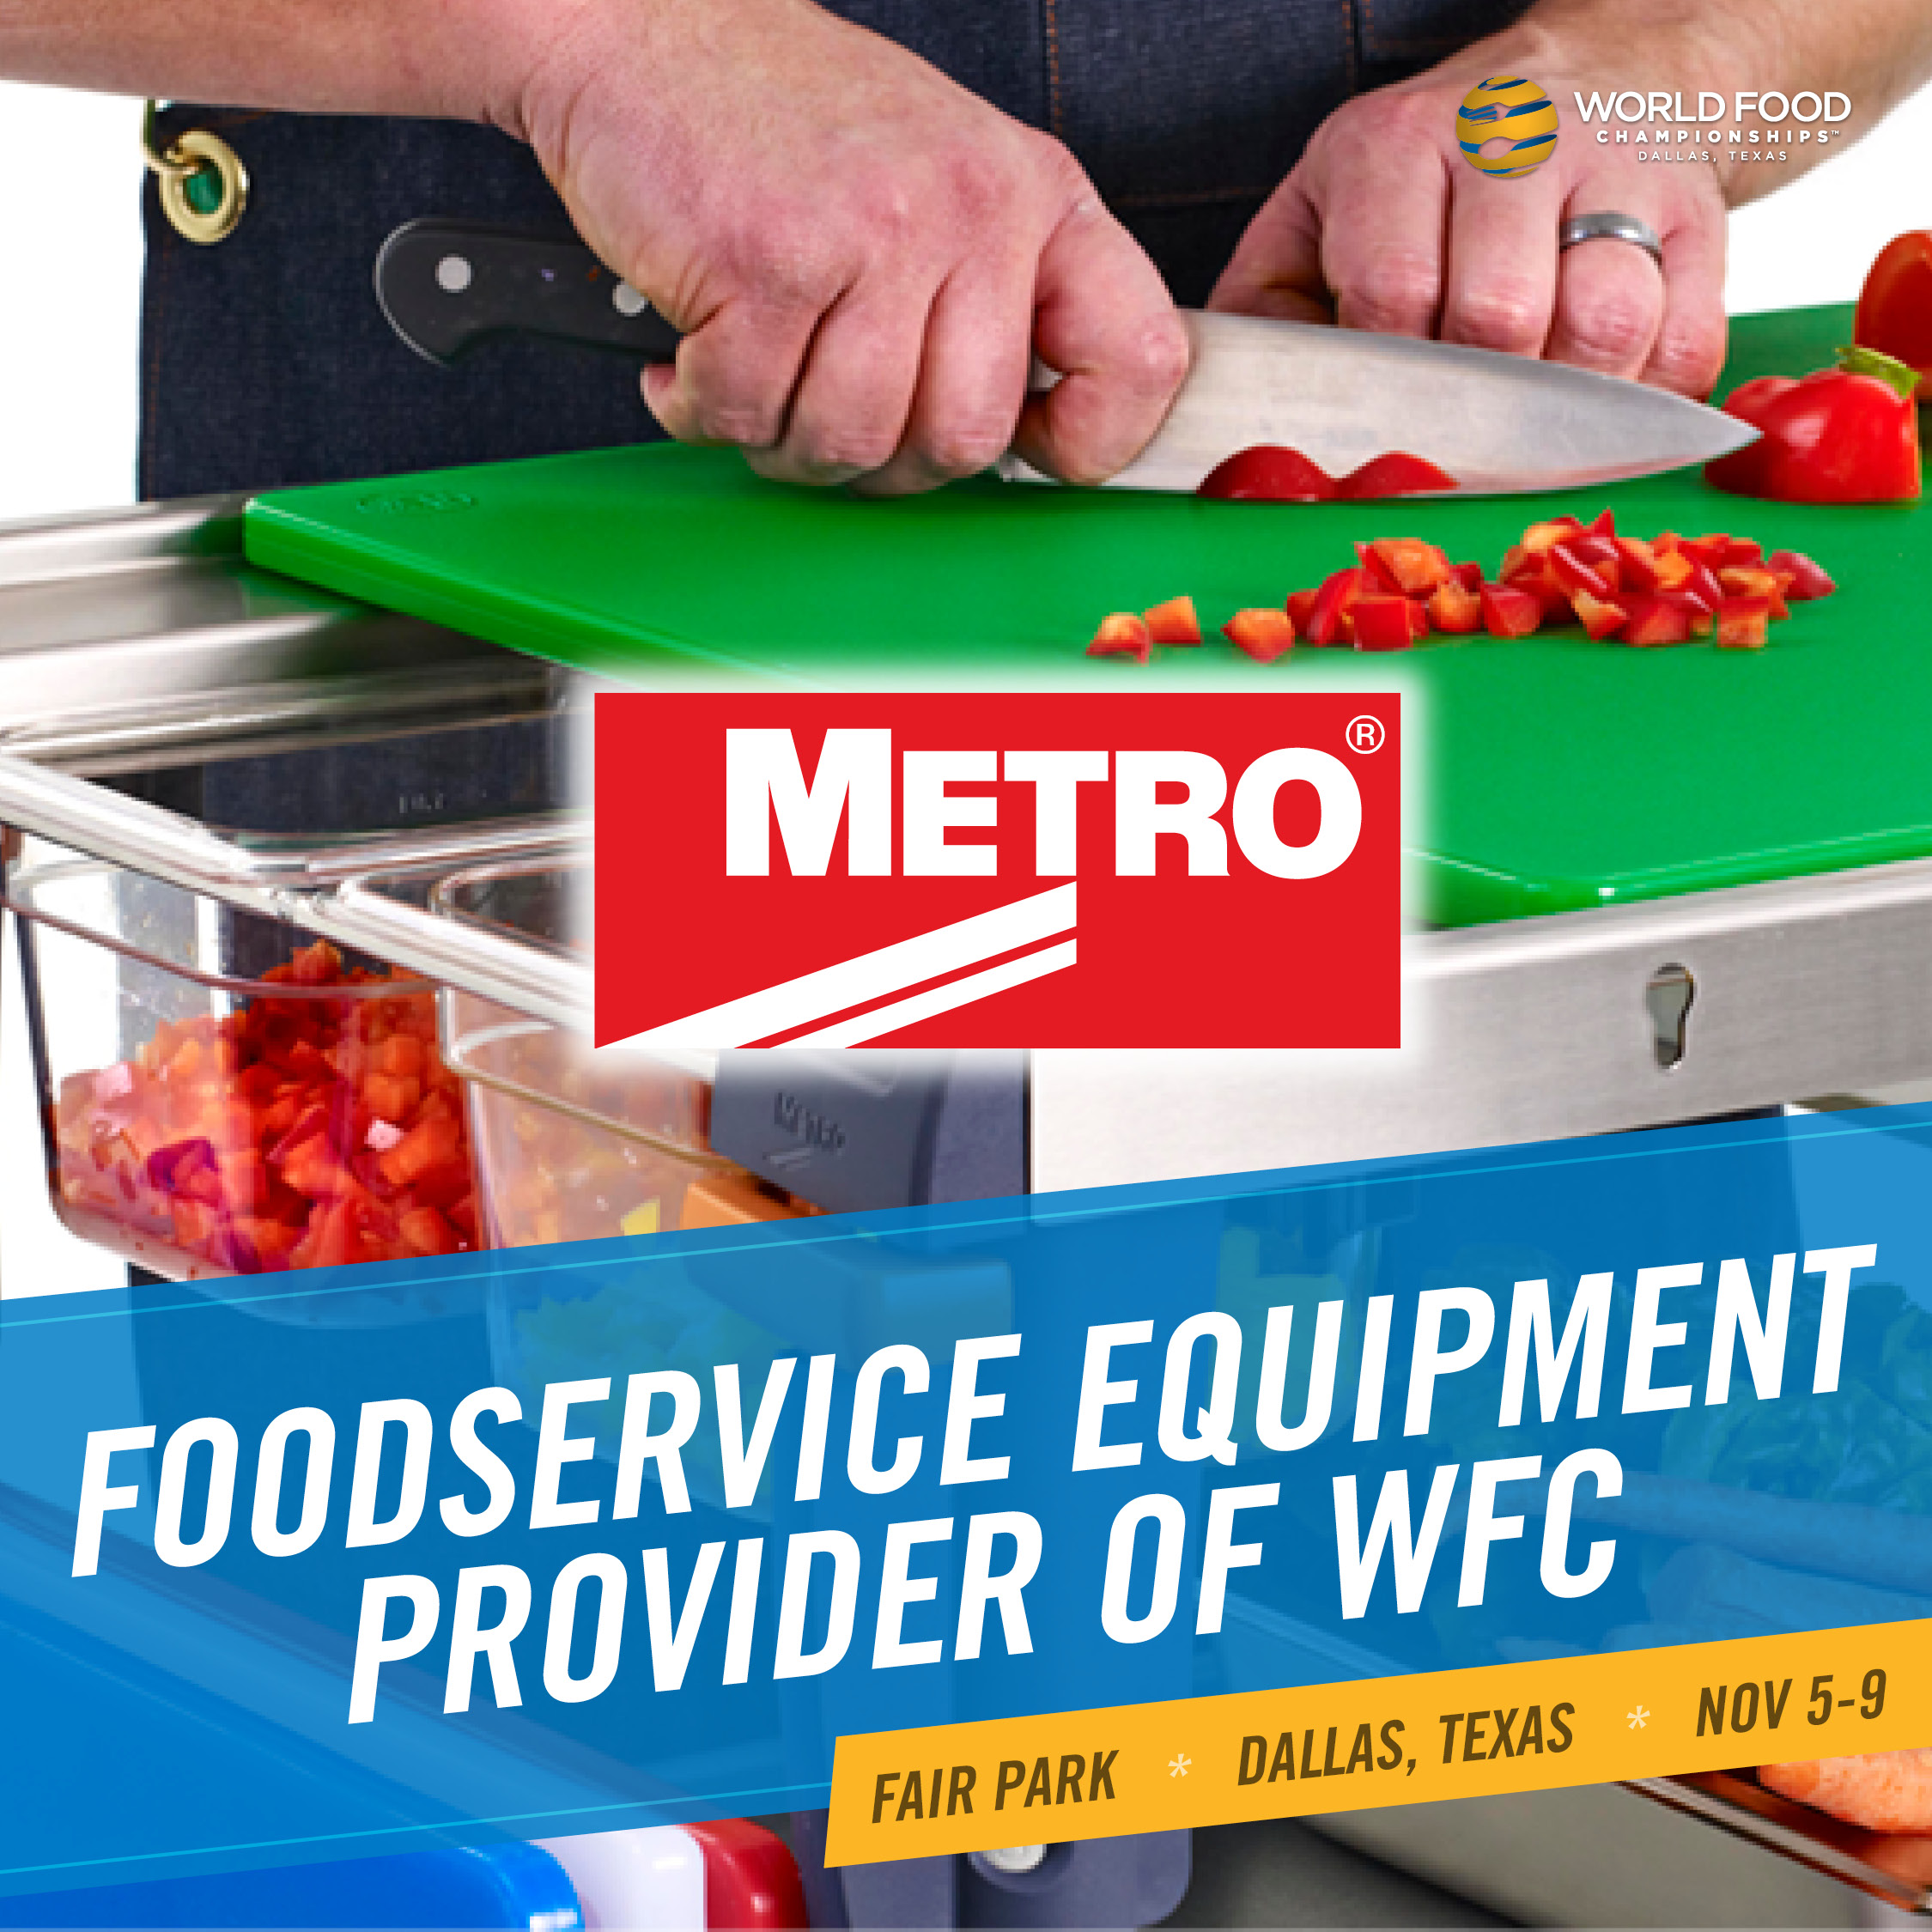 WFC Scores Foodservice Equipment Provider For Main Event